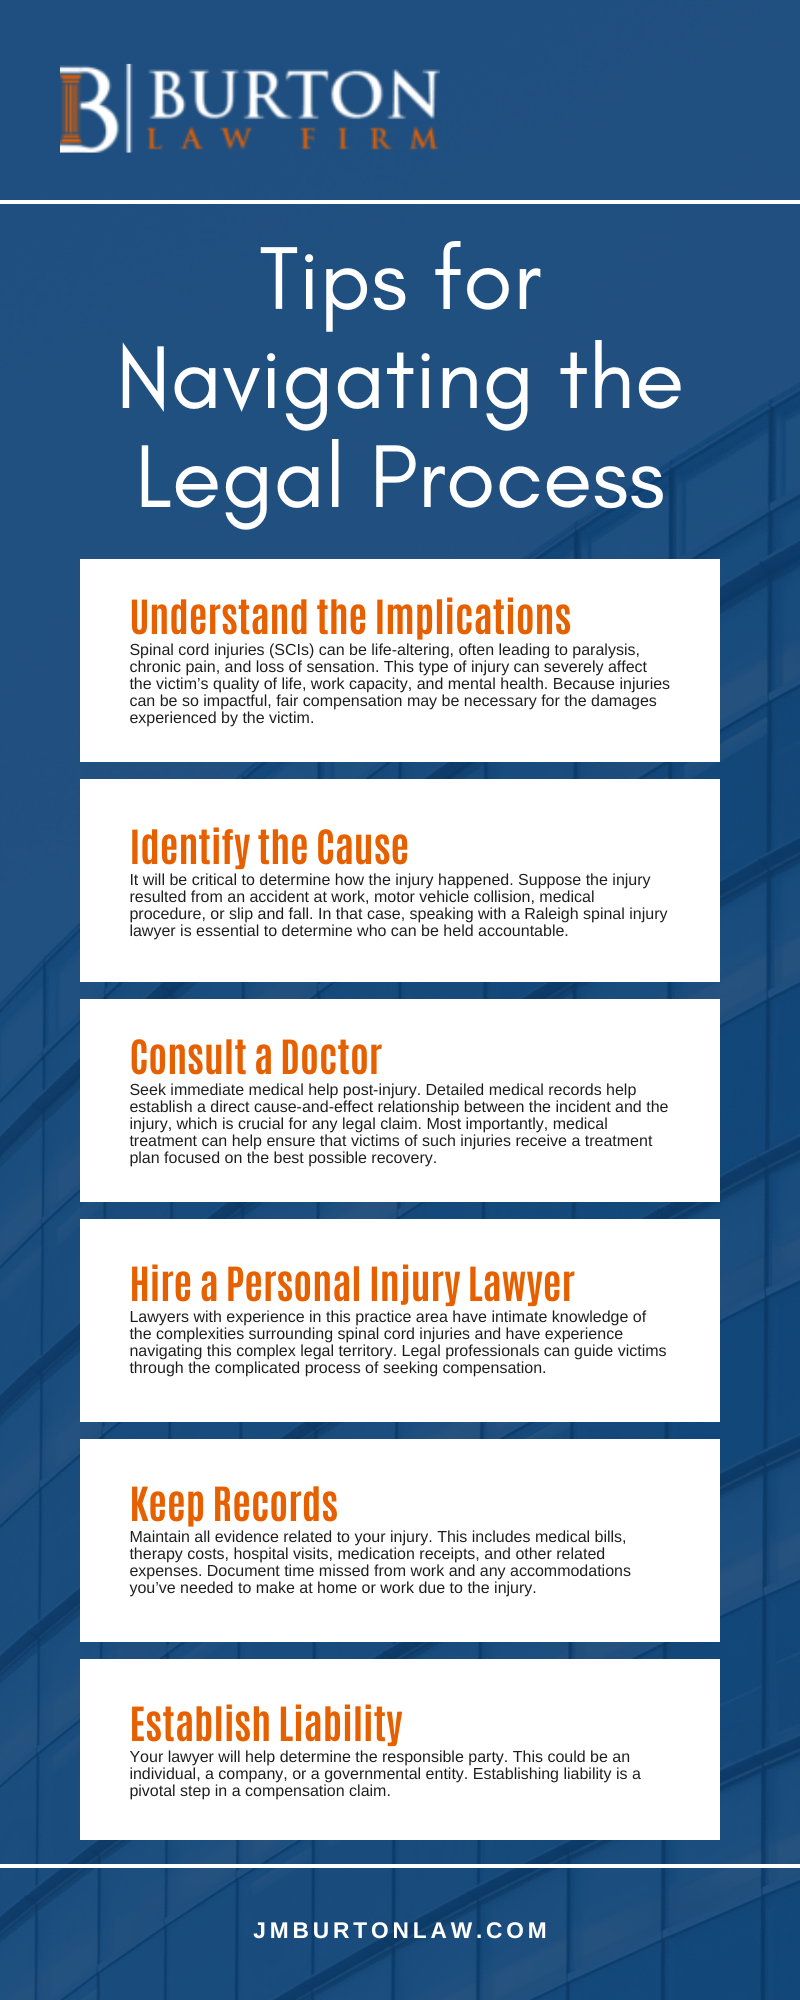 Tips for Navigating the Legal Process Infographic